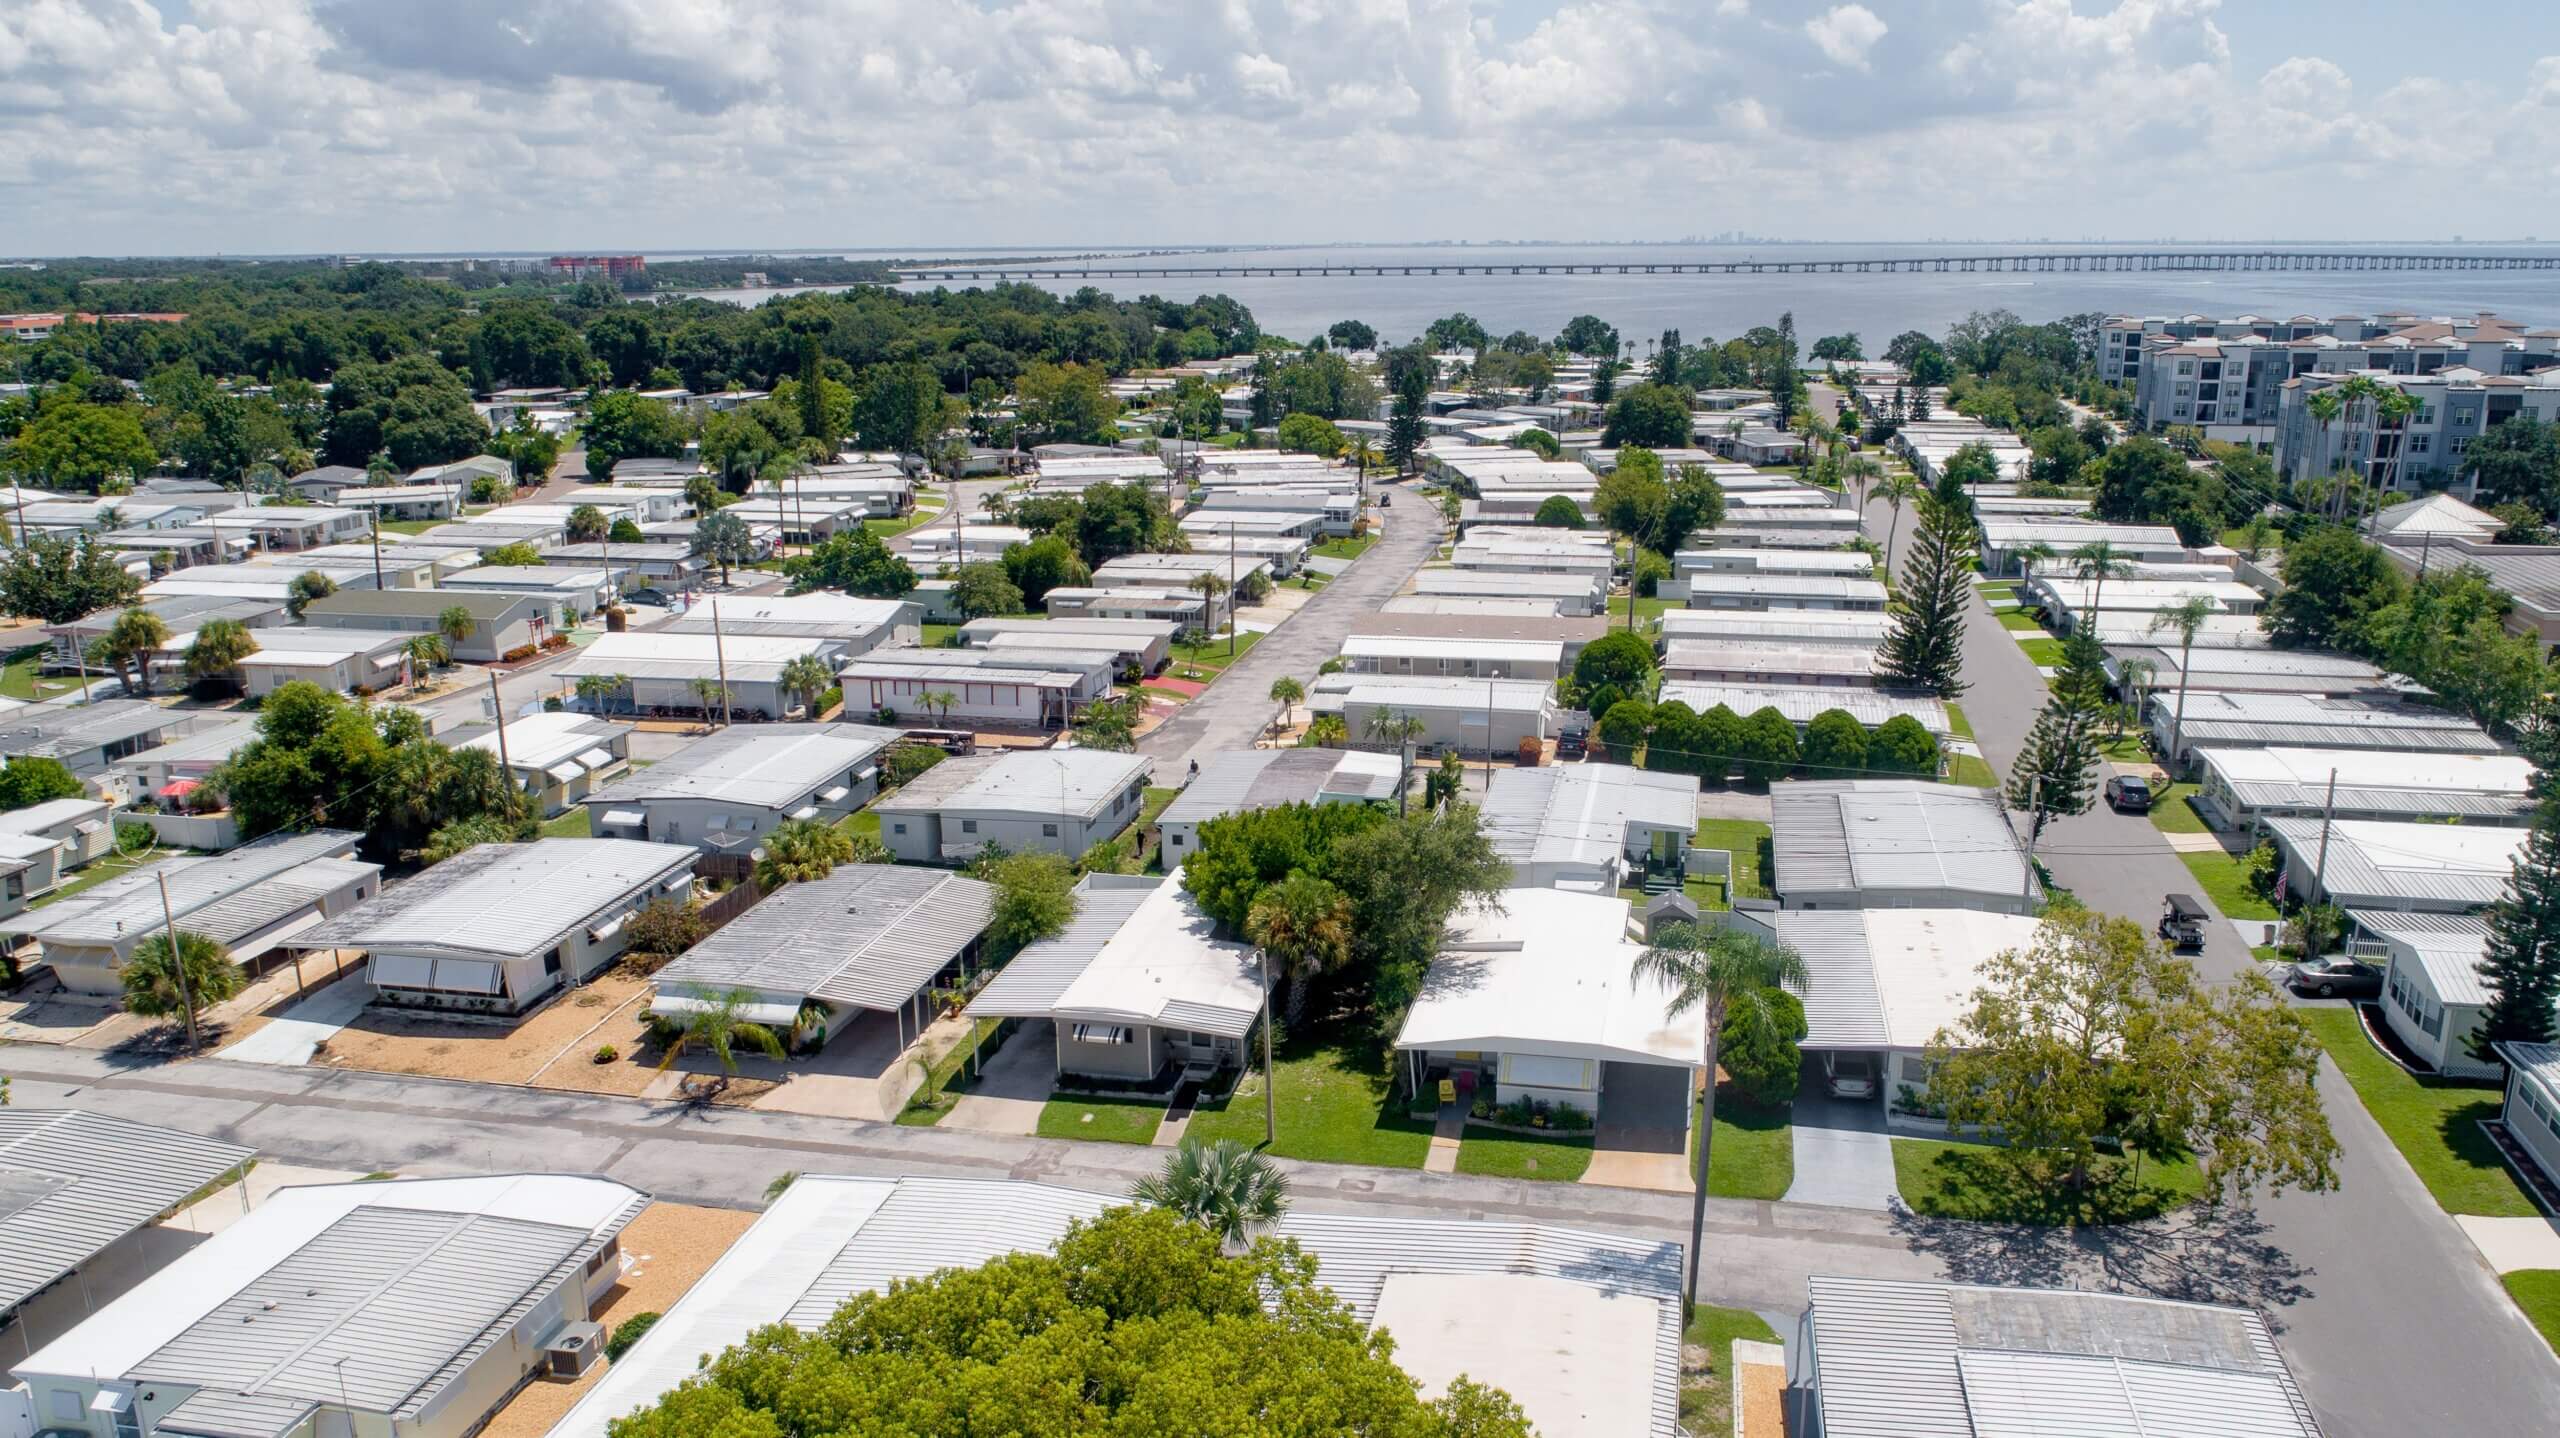 Aerial view of our mobile home community